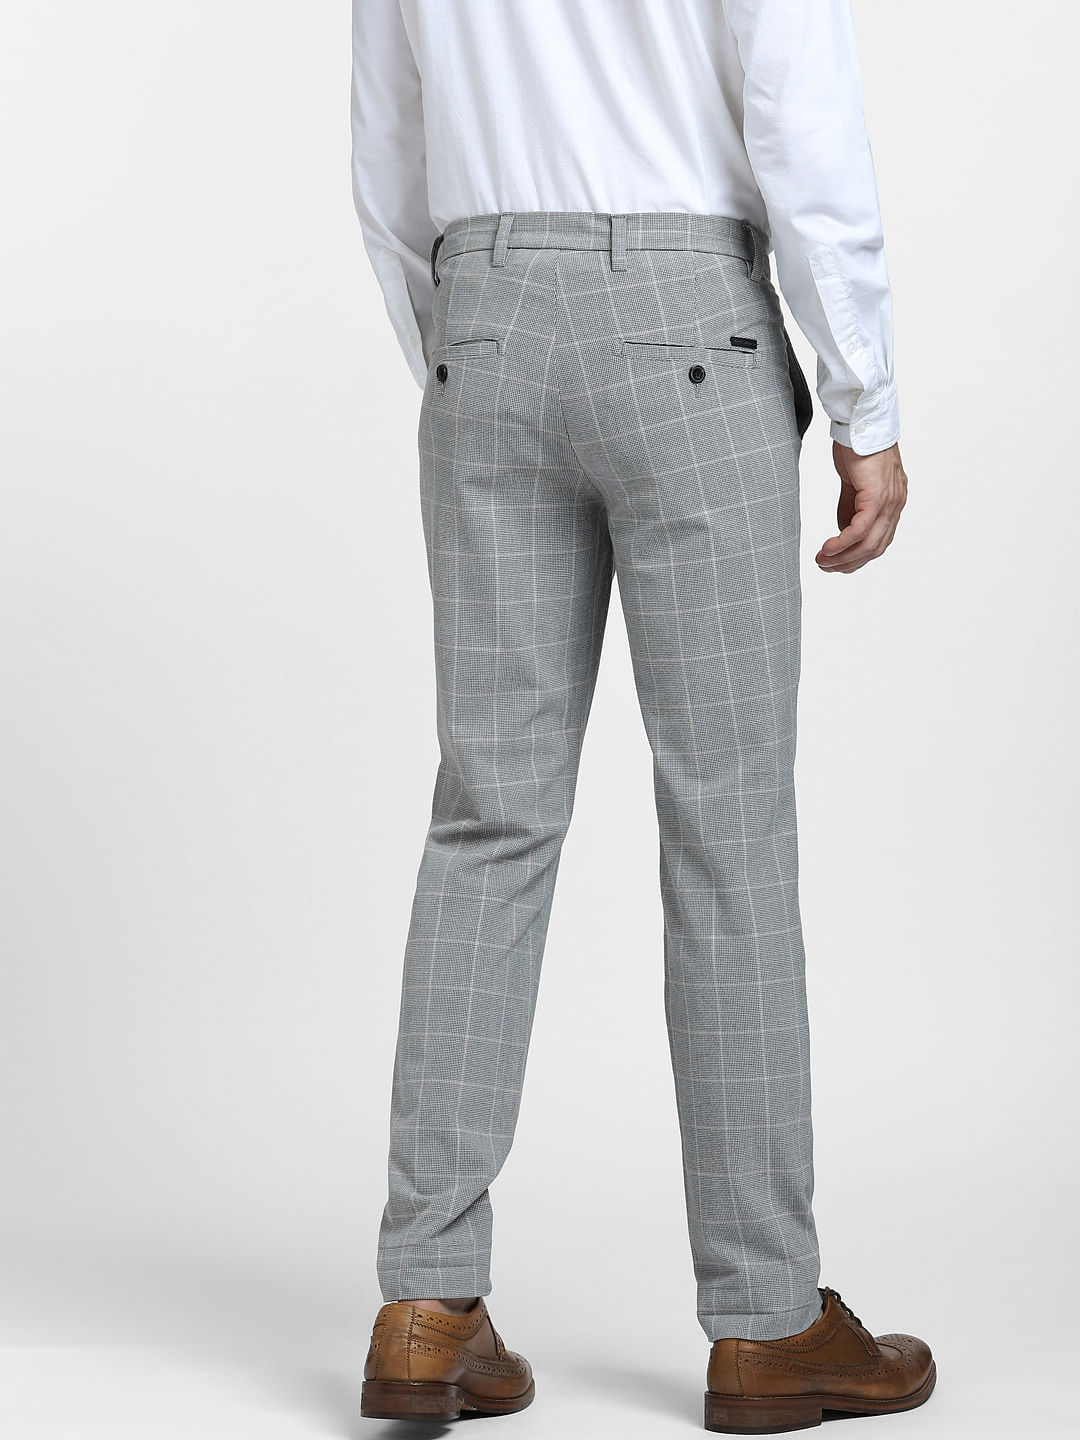 Buy New Look Slim Trousers online - Men - 58 products | FASHIOLA.in